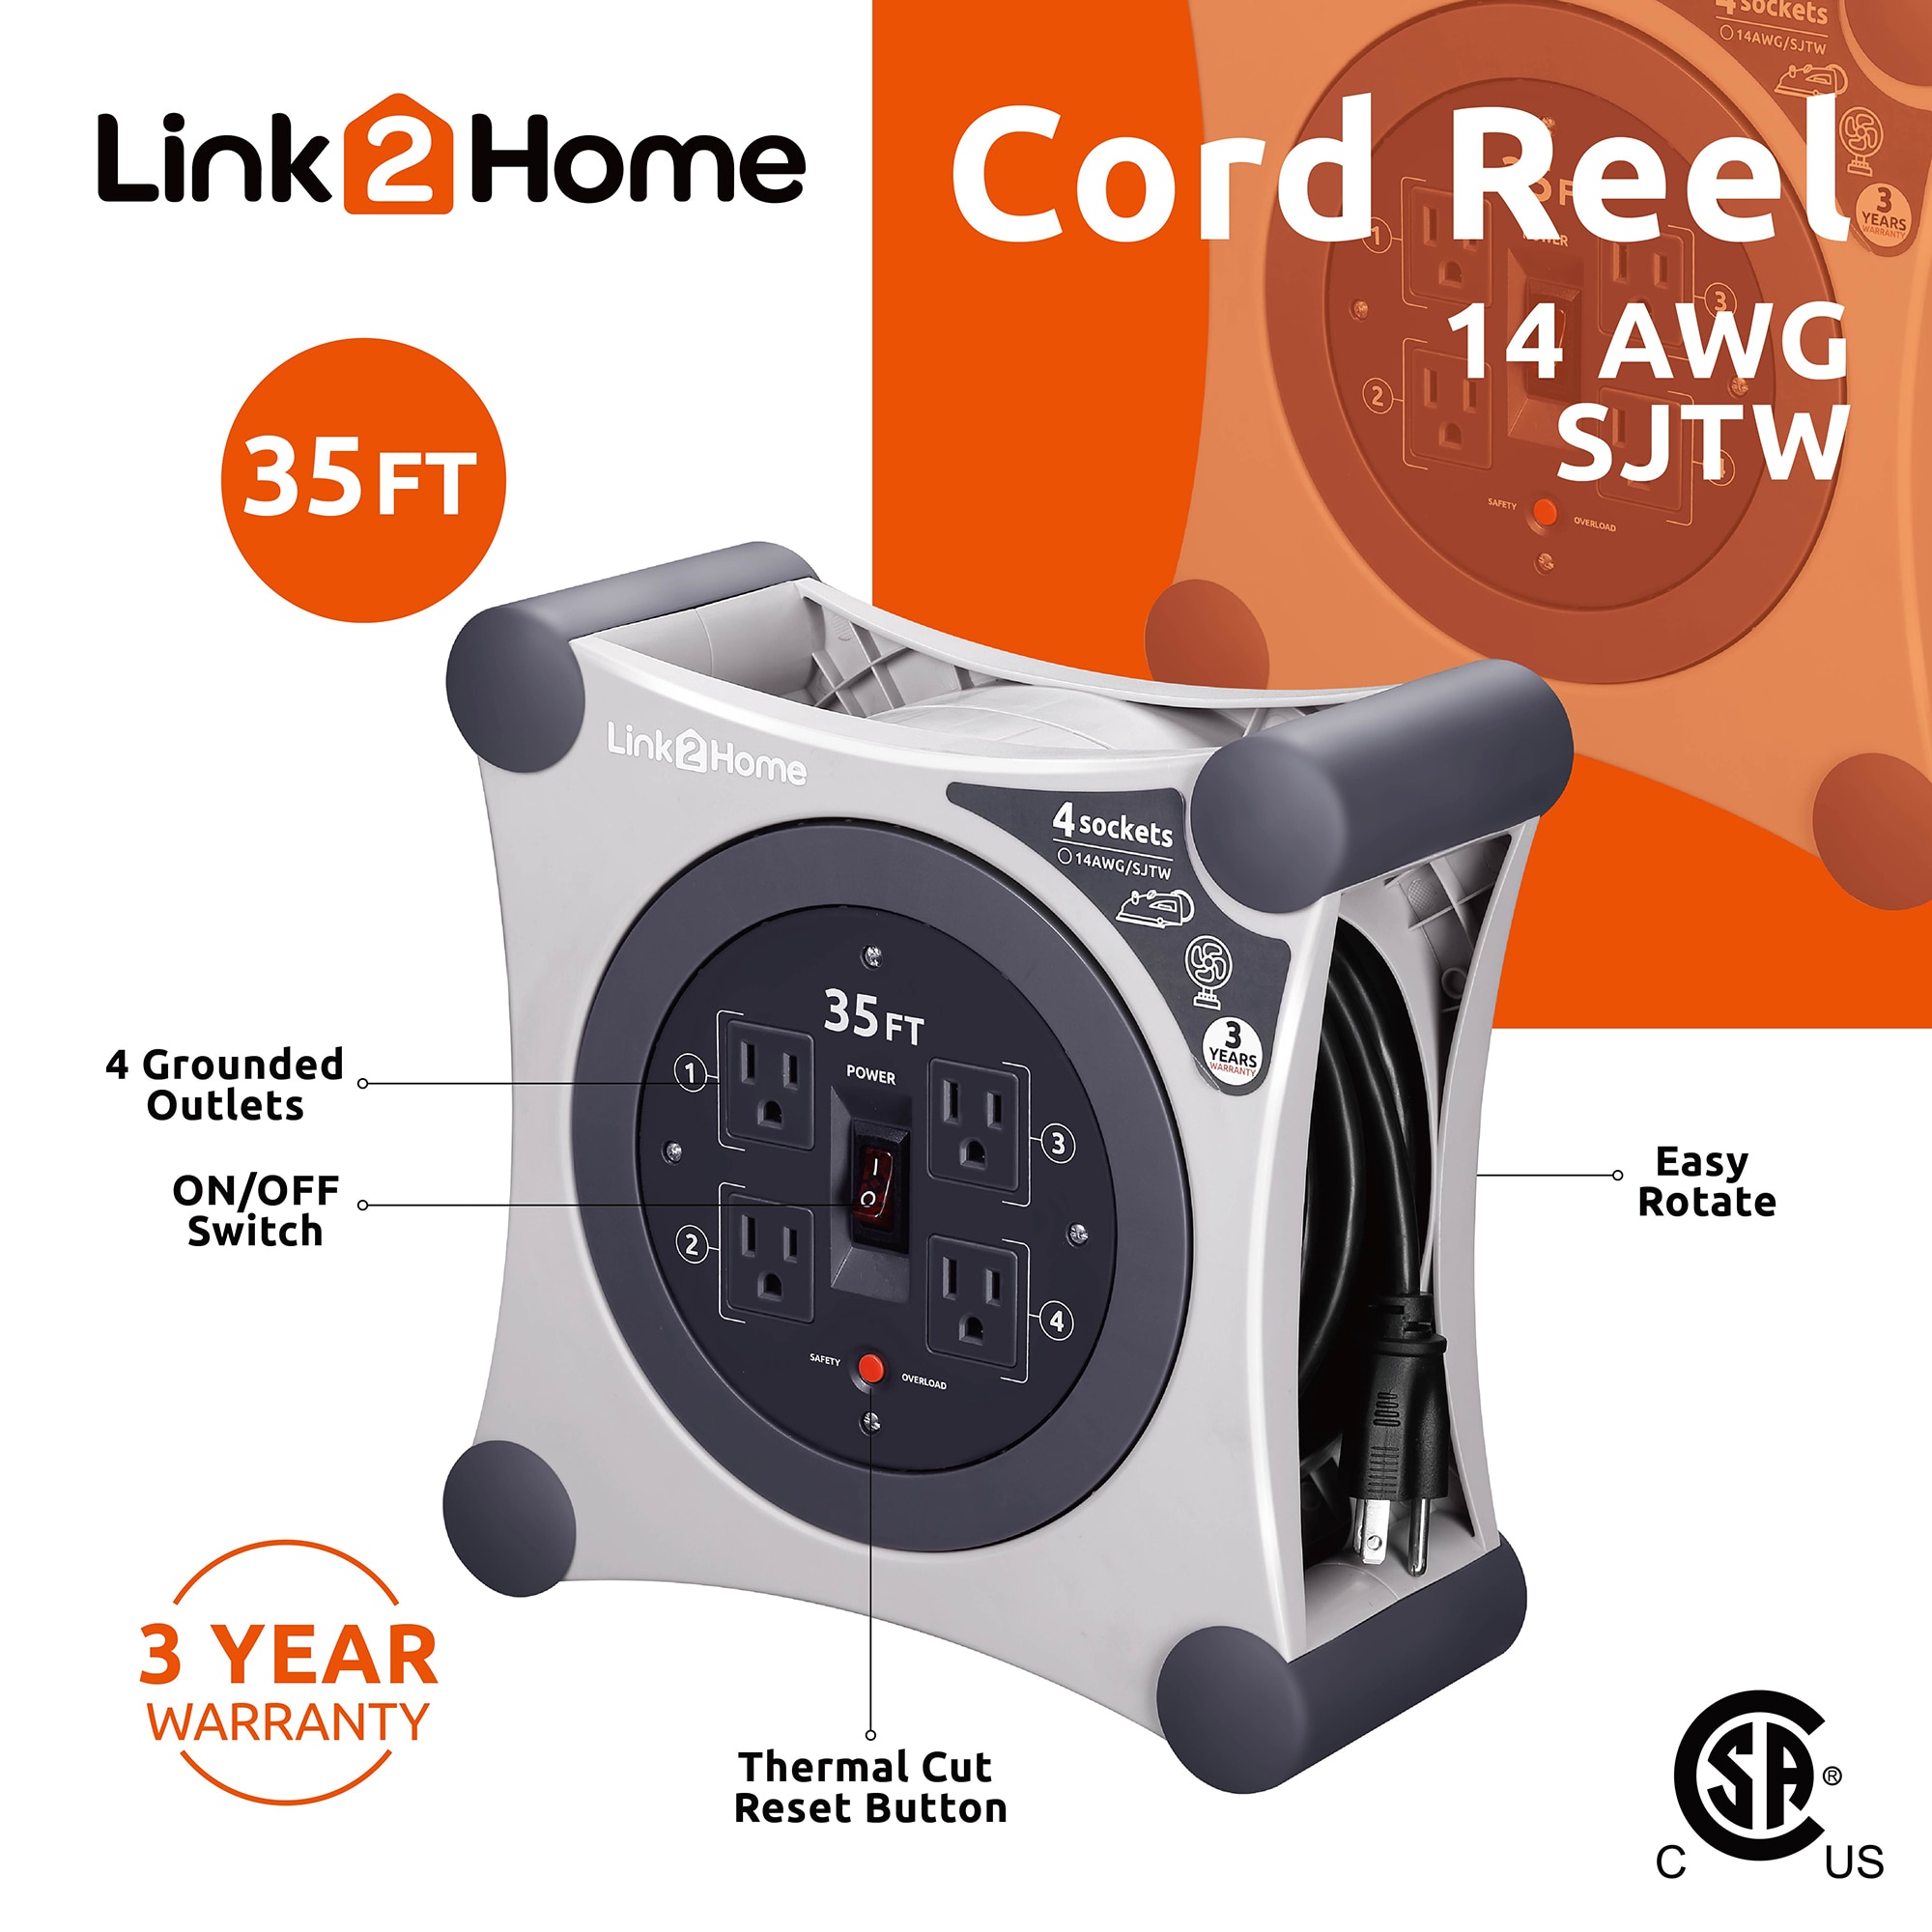 Link 2 Home cord reel 50ft 